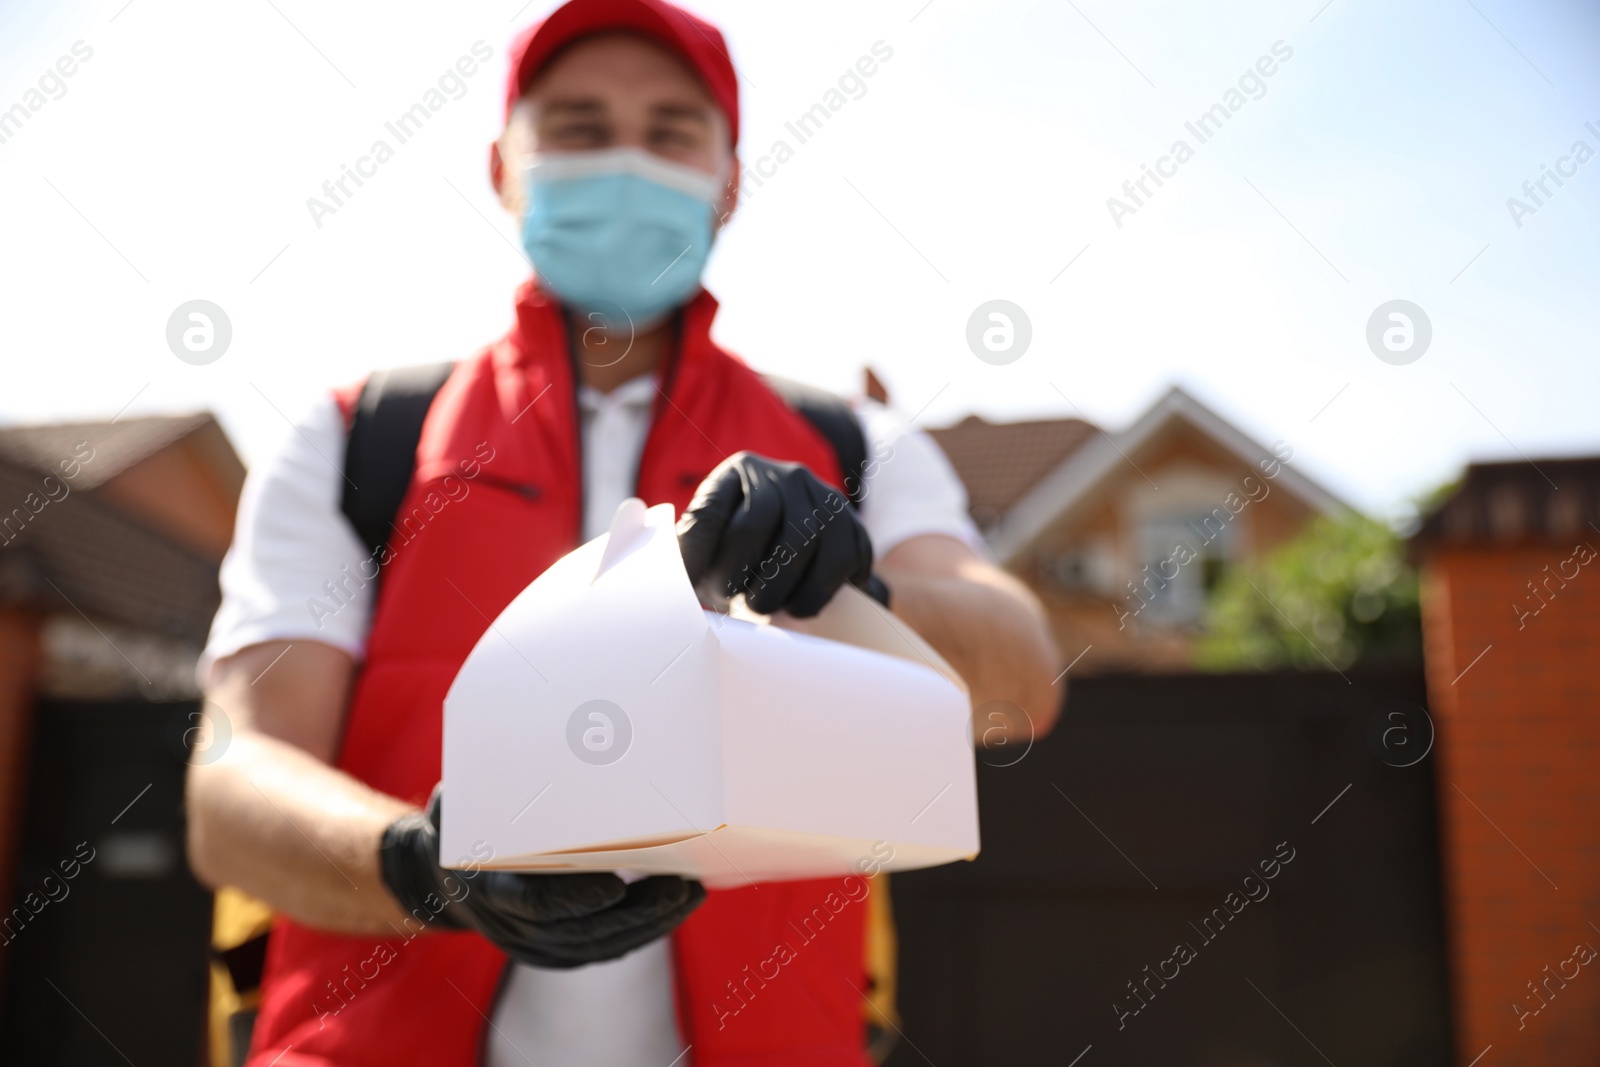 Photo of Courier in protective mask and gloves with order outdoors, focus on hands. Restaurant delivery service during coronavirus quarantine